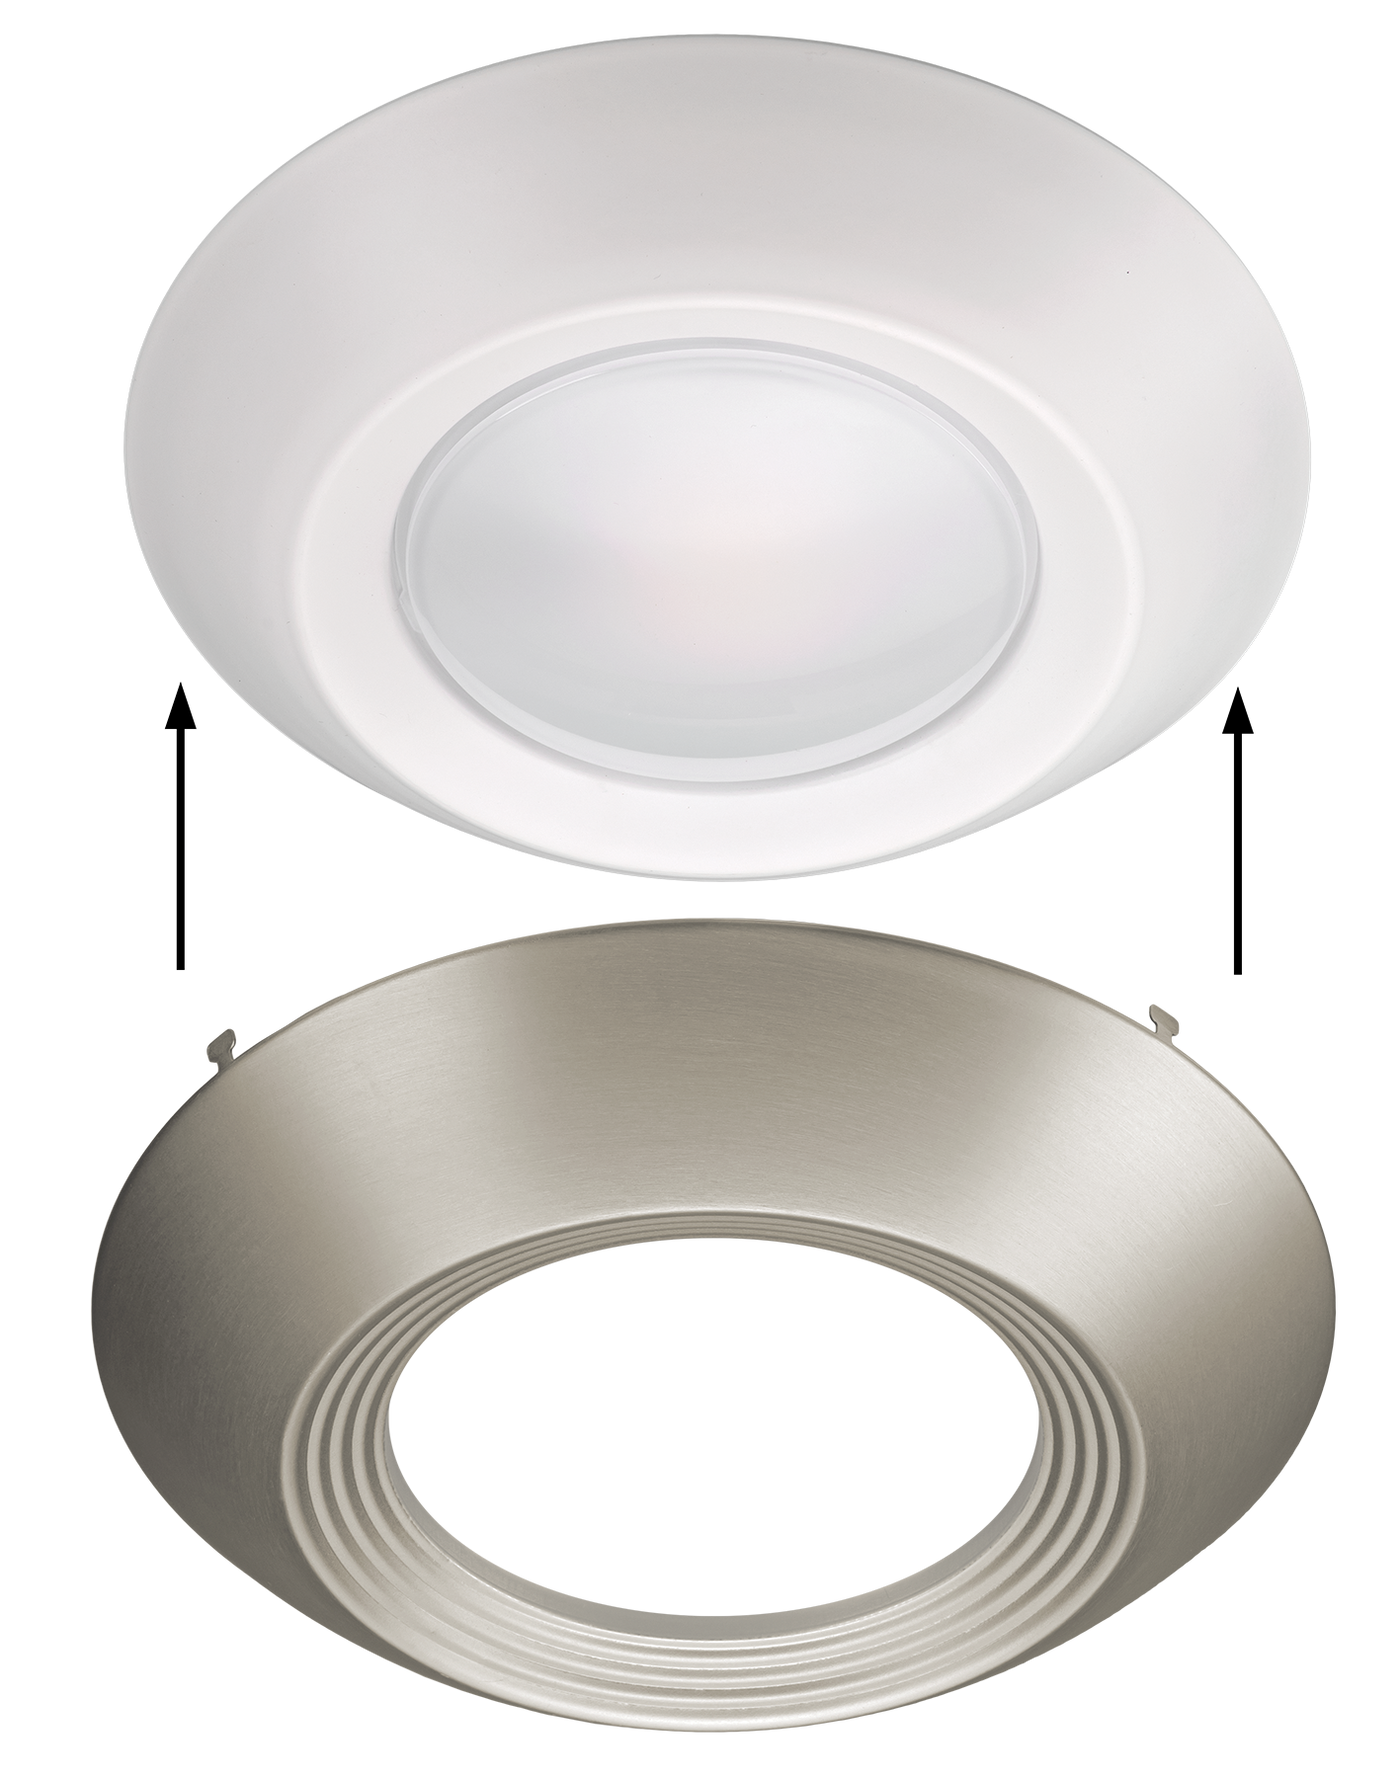 Brushed Nickel Trim for 7.5 Inch Flush Mount Disk Light with TwistFit Mounting System